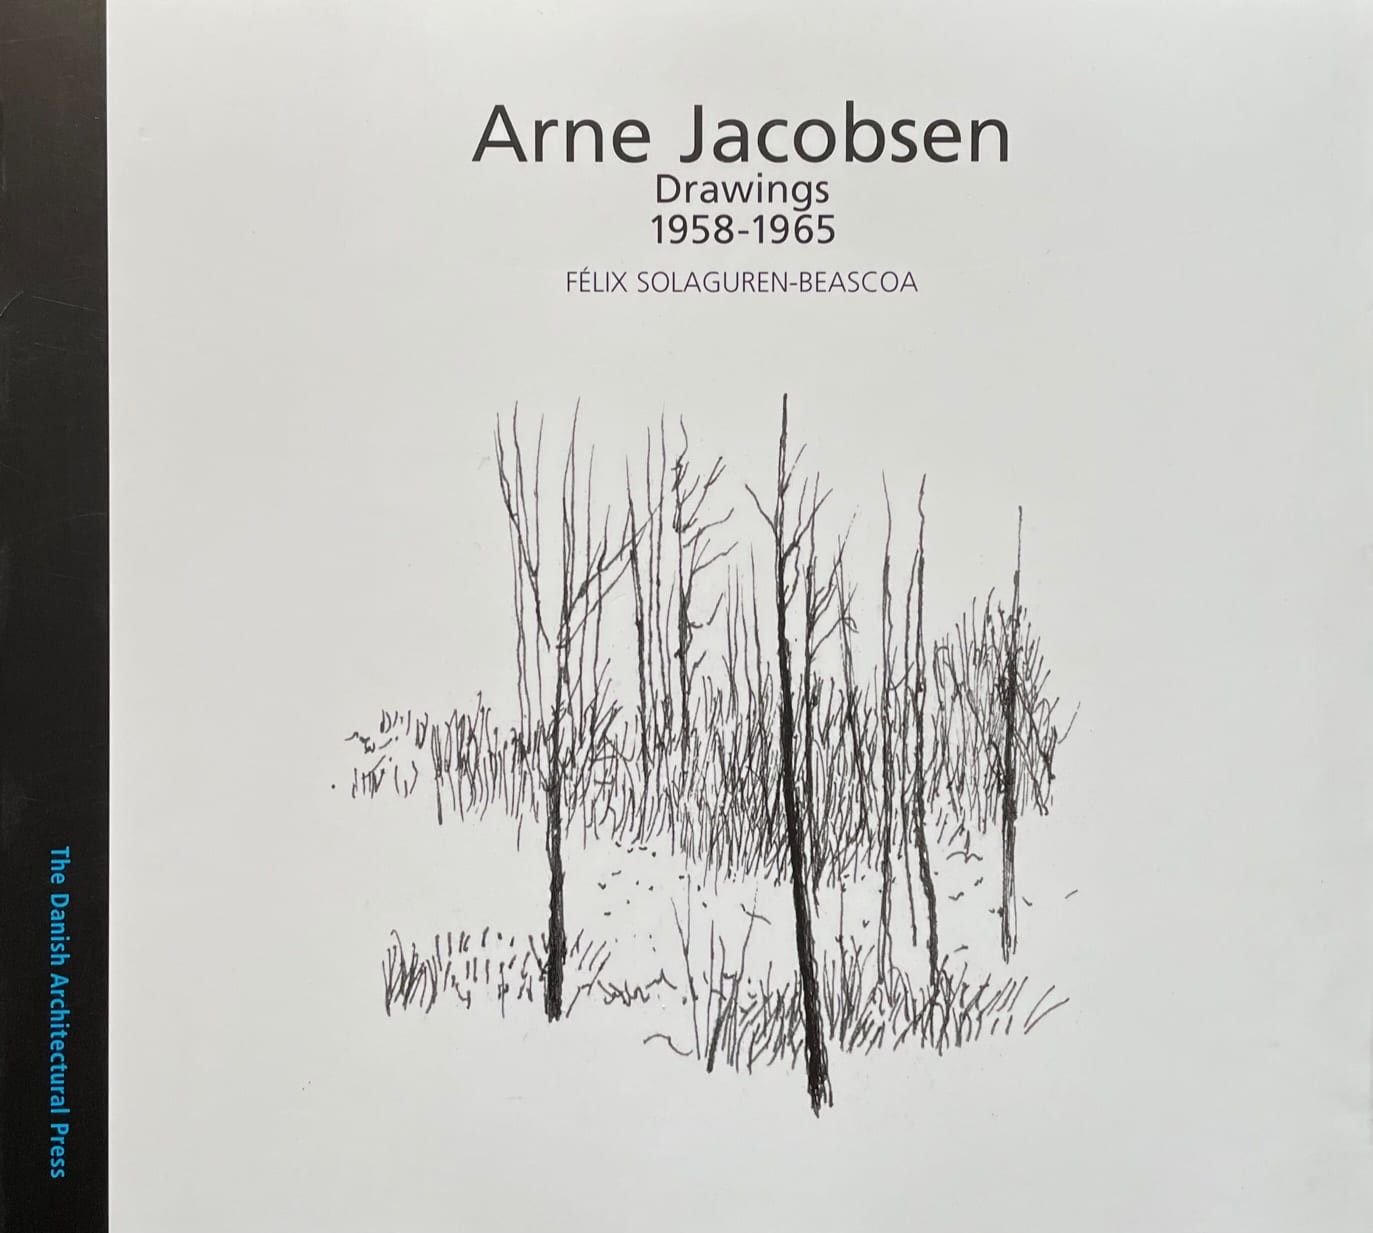 Arne Jacobsen. Approach to his complete works 1926 – 1949